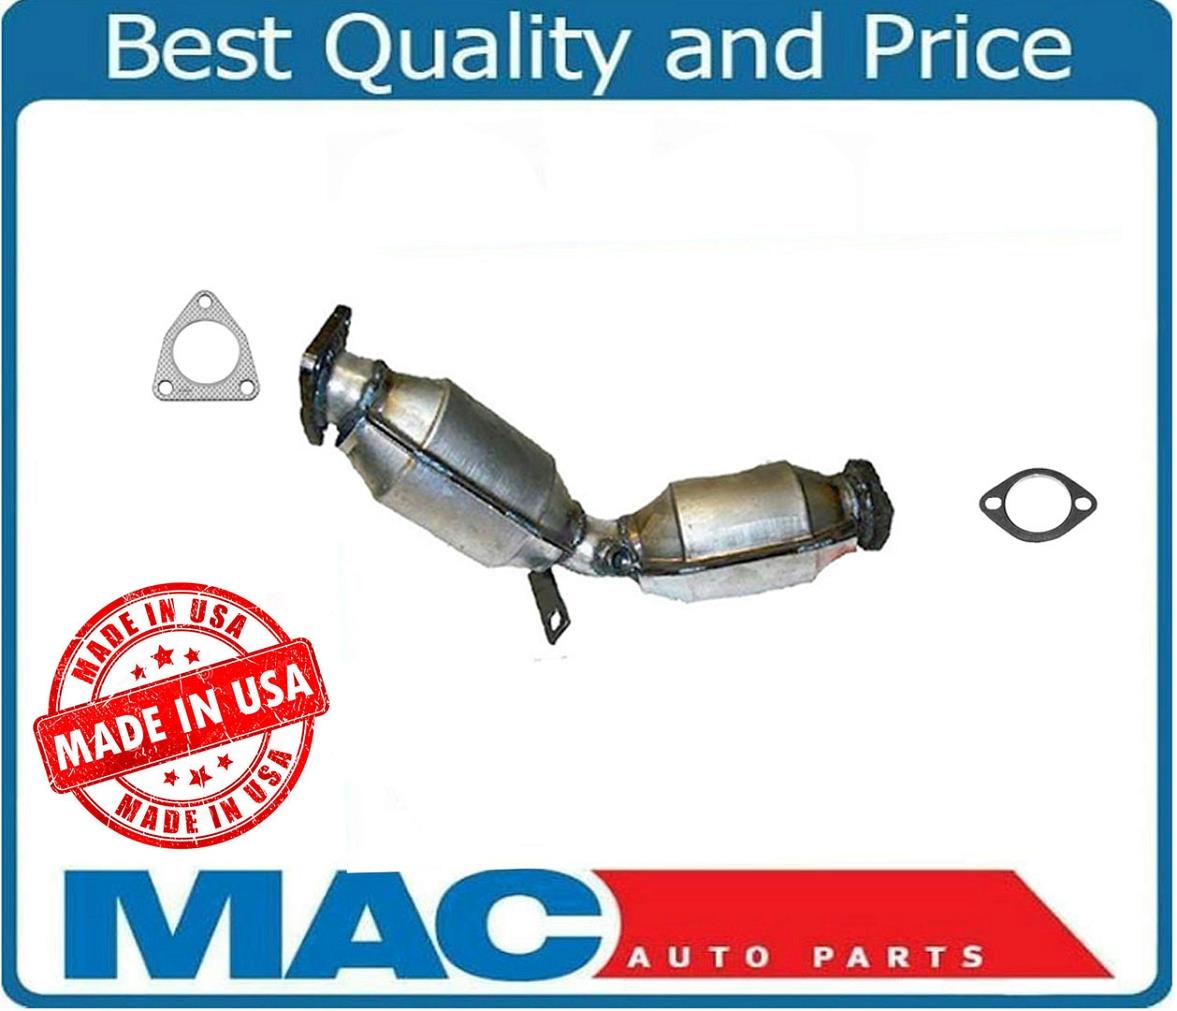 Catalytic Converter Fits 2001 Toyota Camry 3.0L V6 GAS DOHC